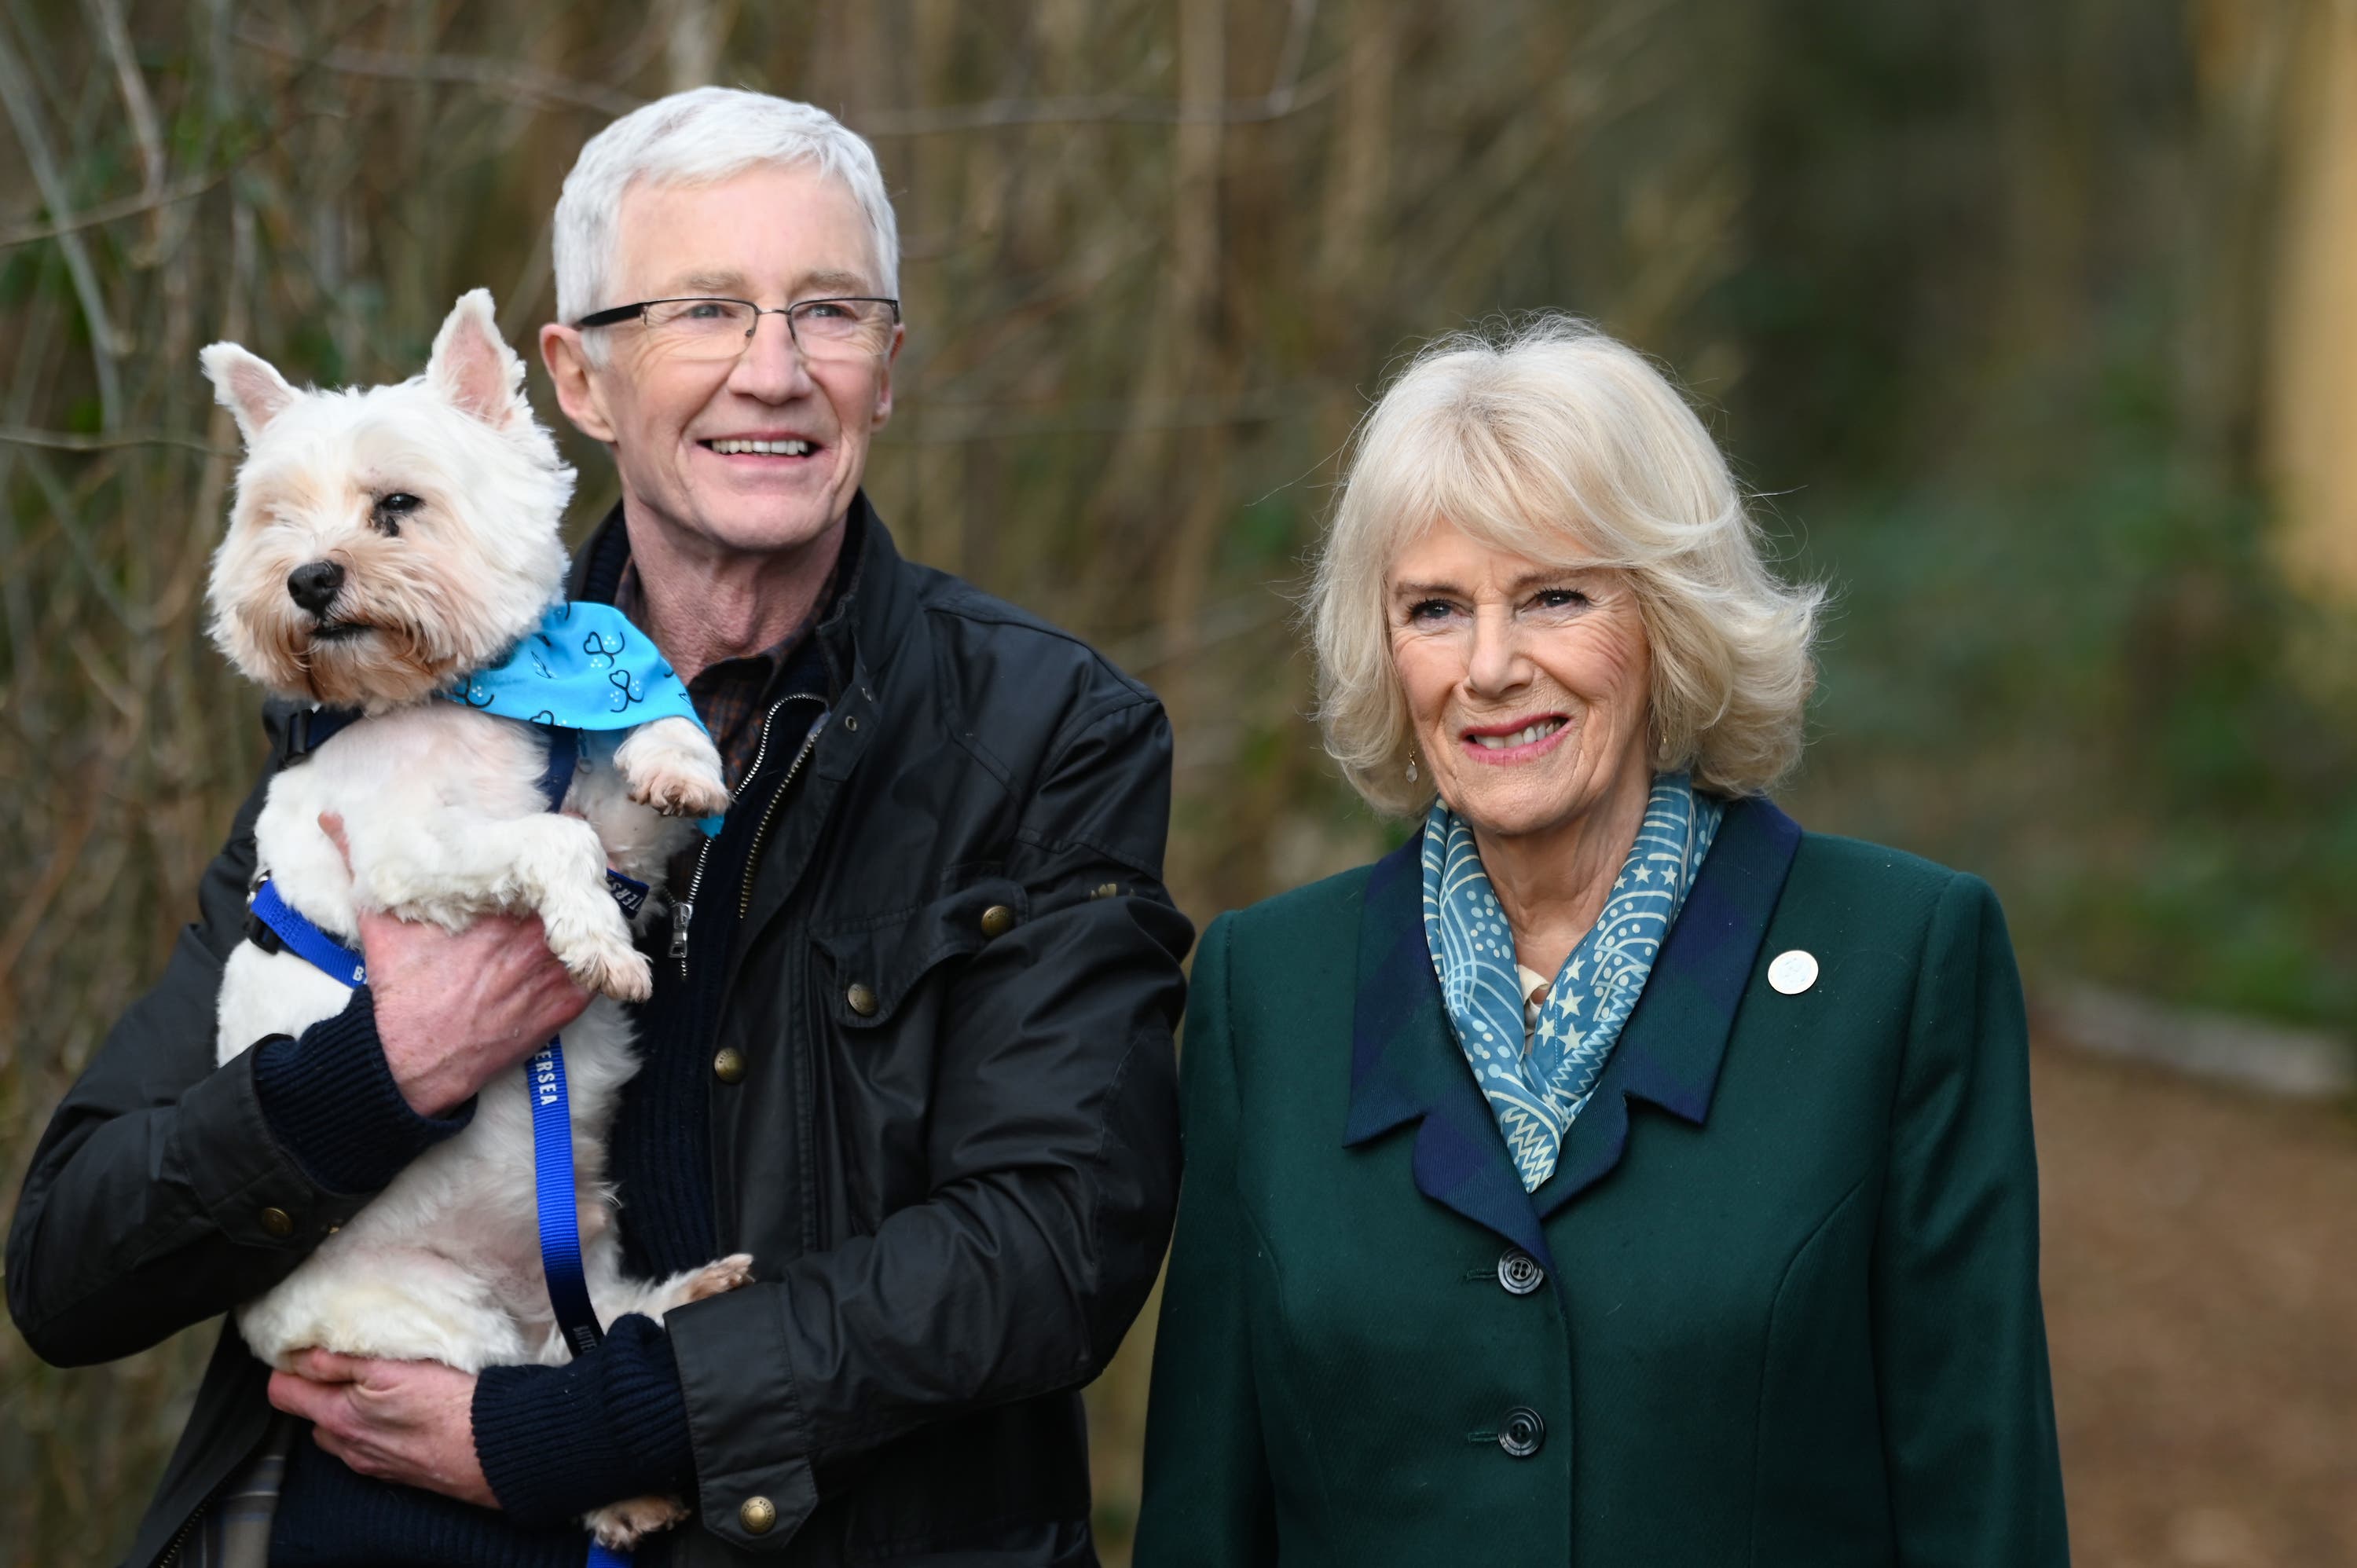 The Queen Consort on a walk with Battersea ambassador Paul O’Grady and a rescue dog during her visit to the centre.